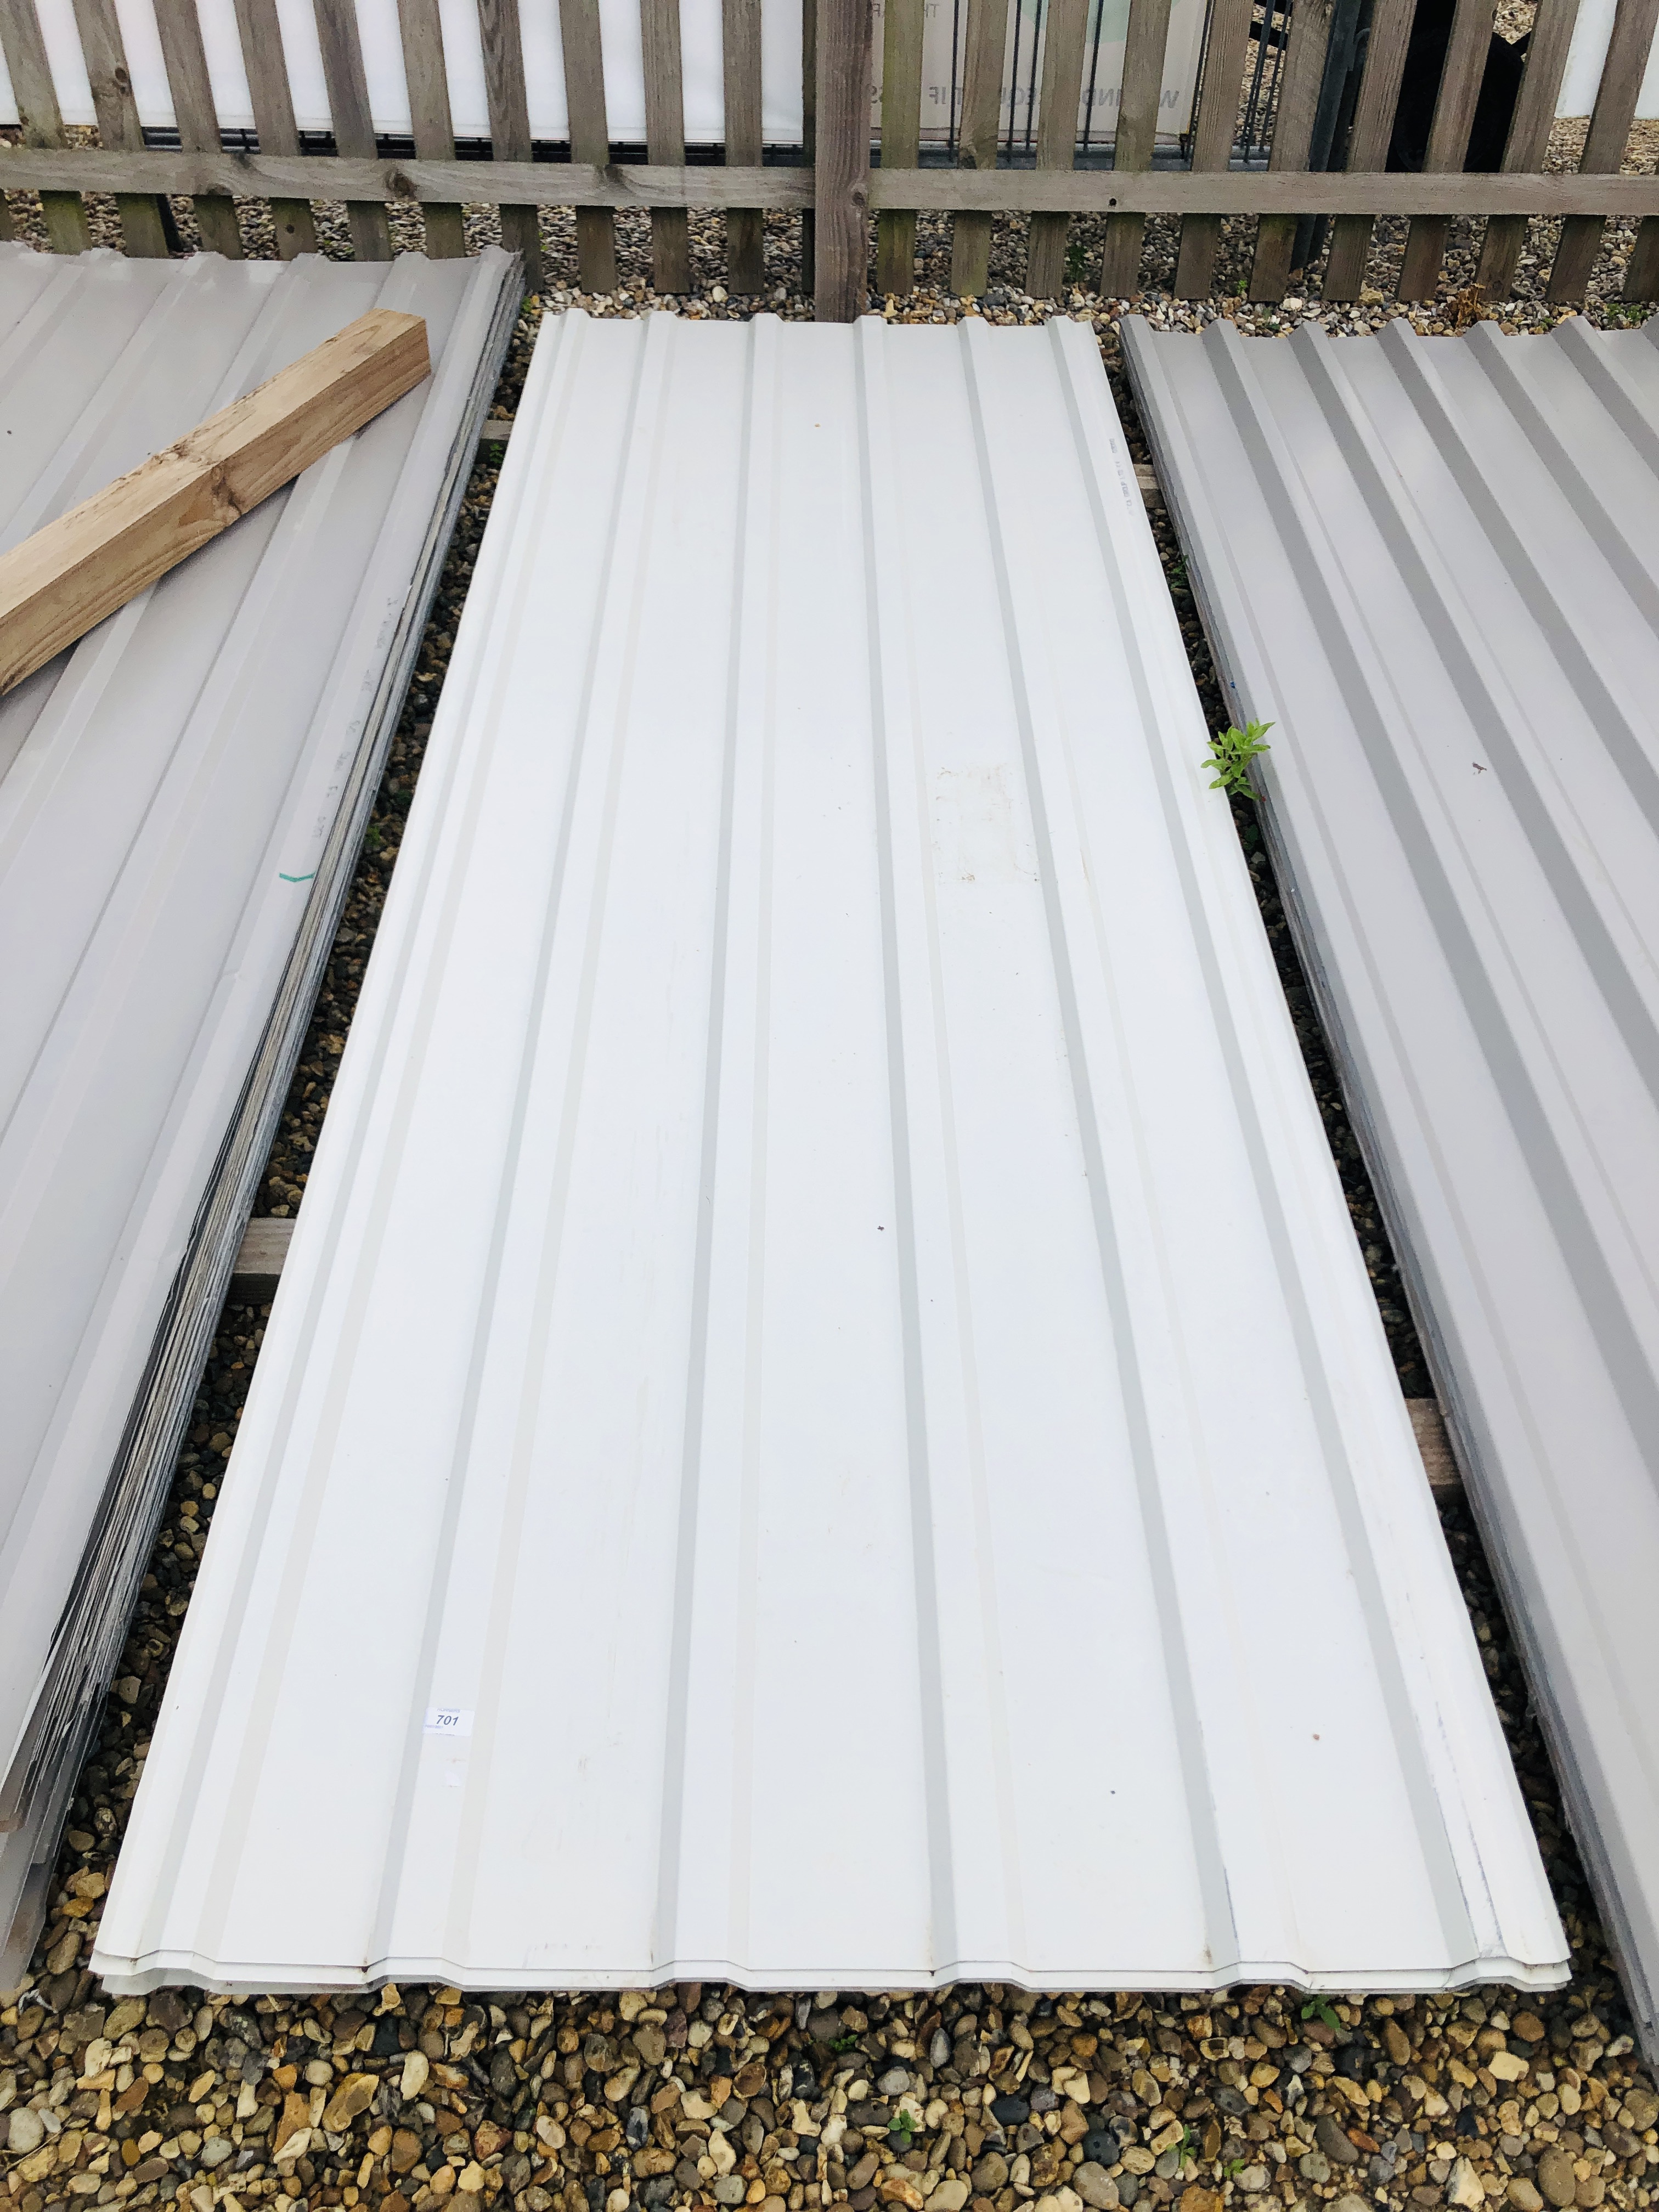 17 x 3M X 1M PROFILE STEEL ROOF LINER SHEETS (GREY / BROWN)